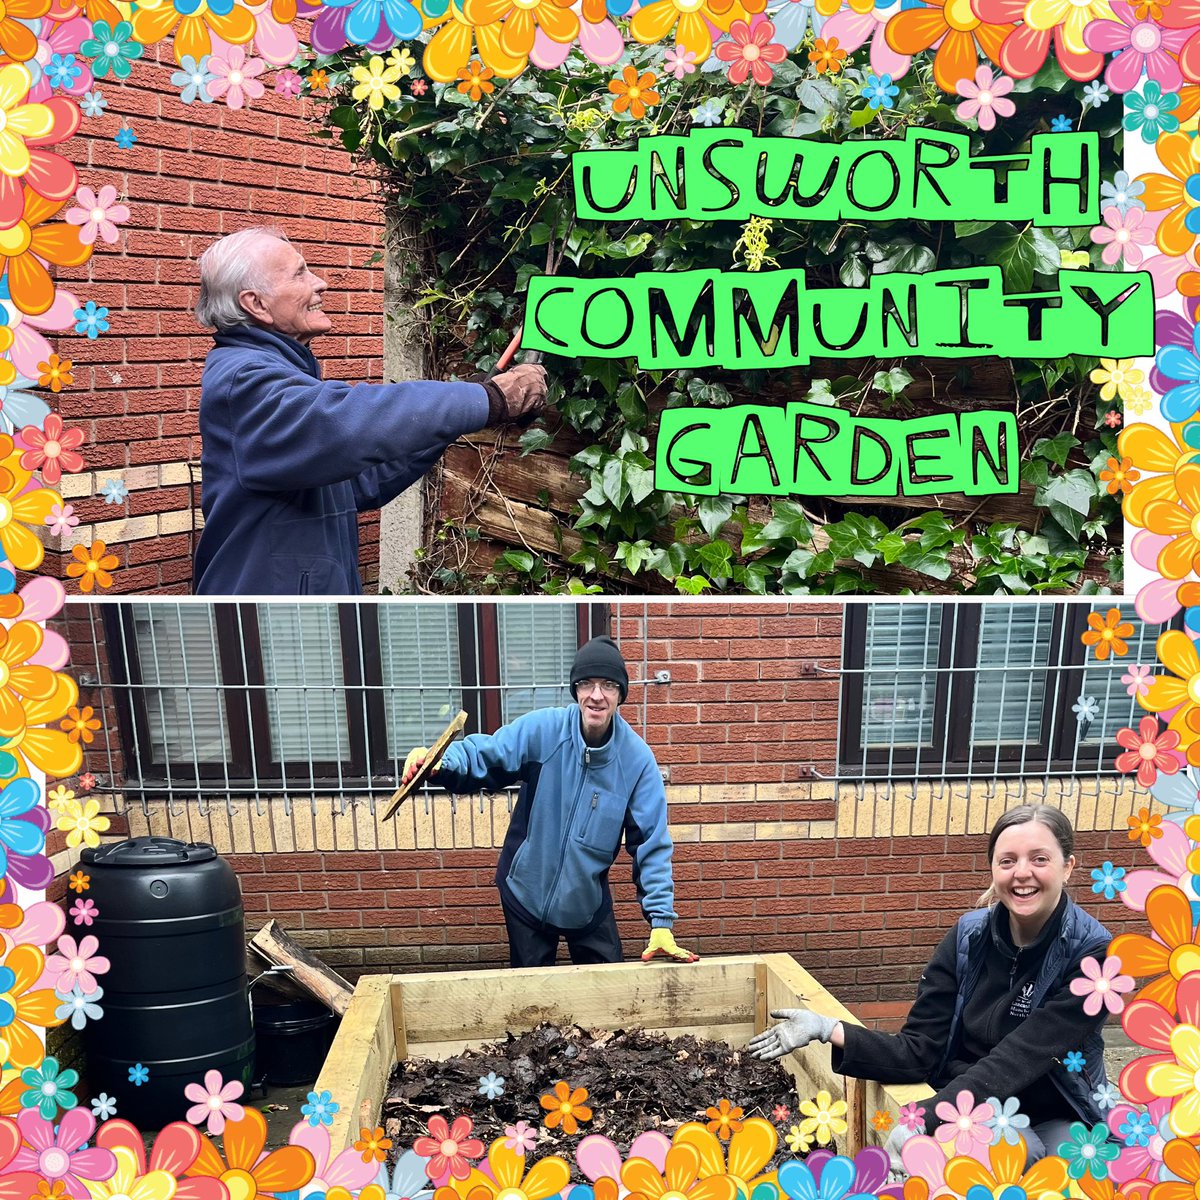 The Unsworth community garden is coming on.. we have started our vegetable patch using our own mulch from our leaf moulds #greenprescribing #unsworthcommunitygarden @myplace2gr0w @LoveUnsworth @LoveWhitefield @Bury_Gp_Fed